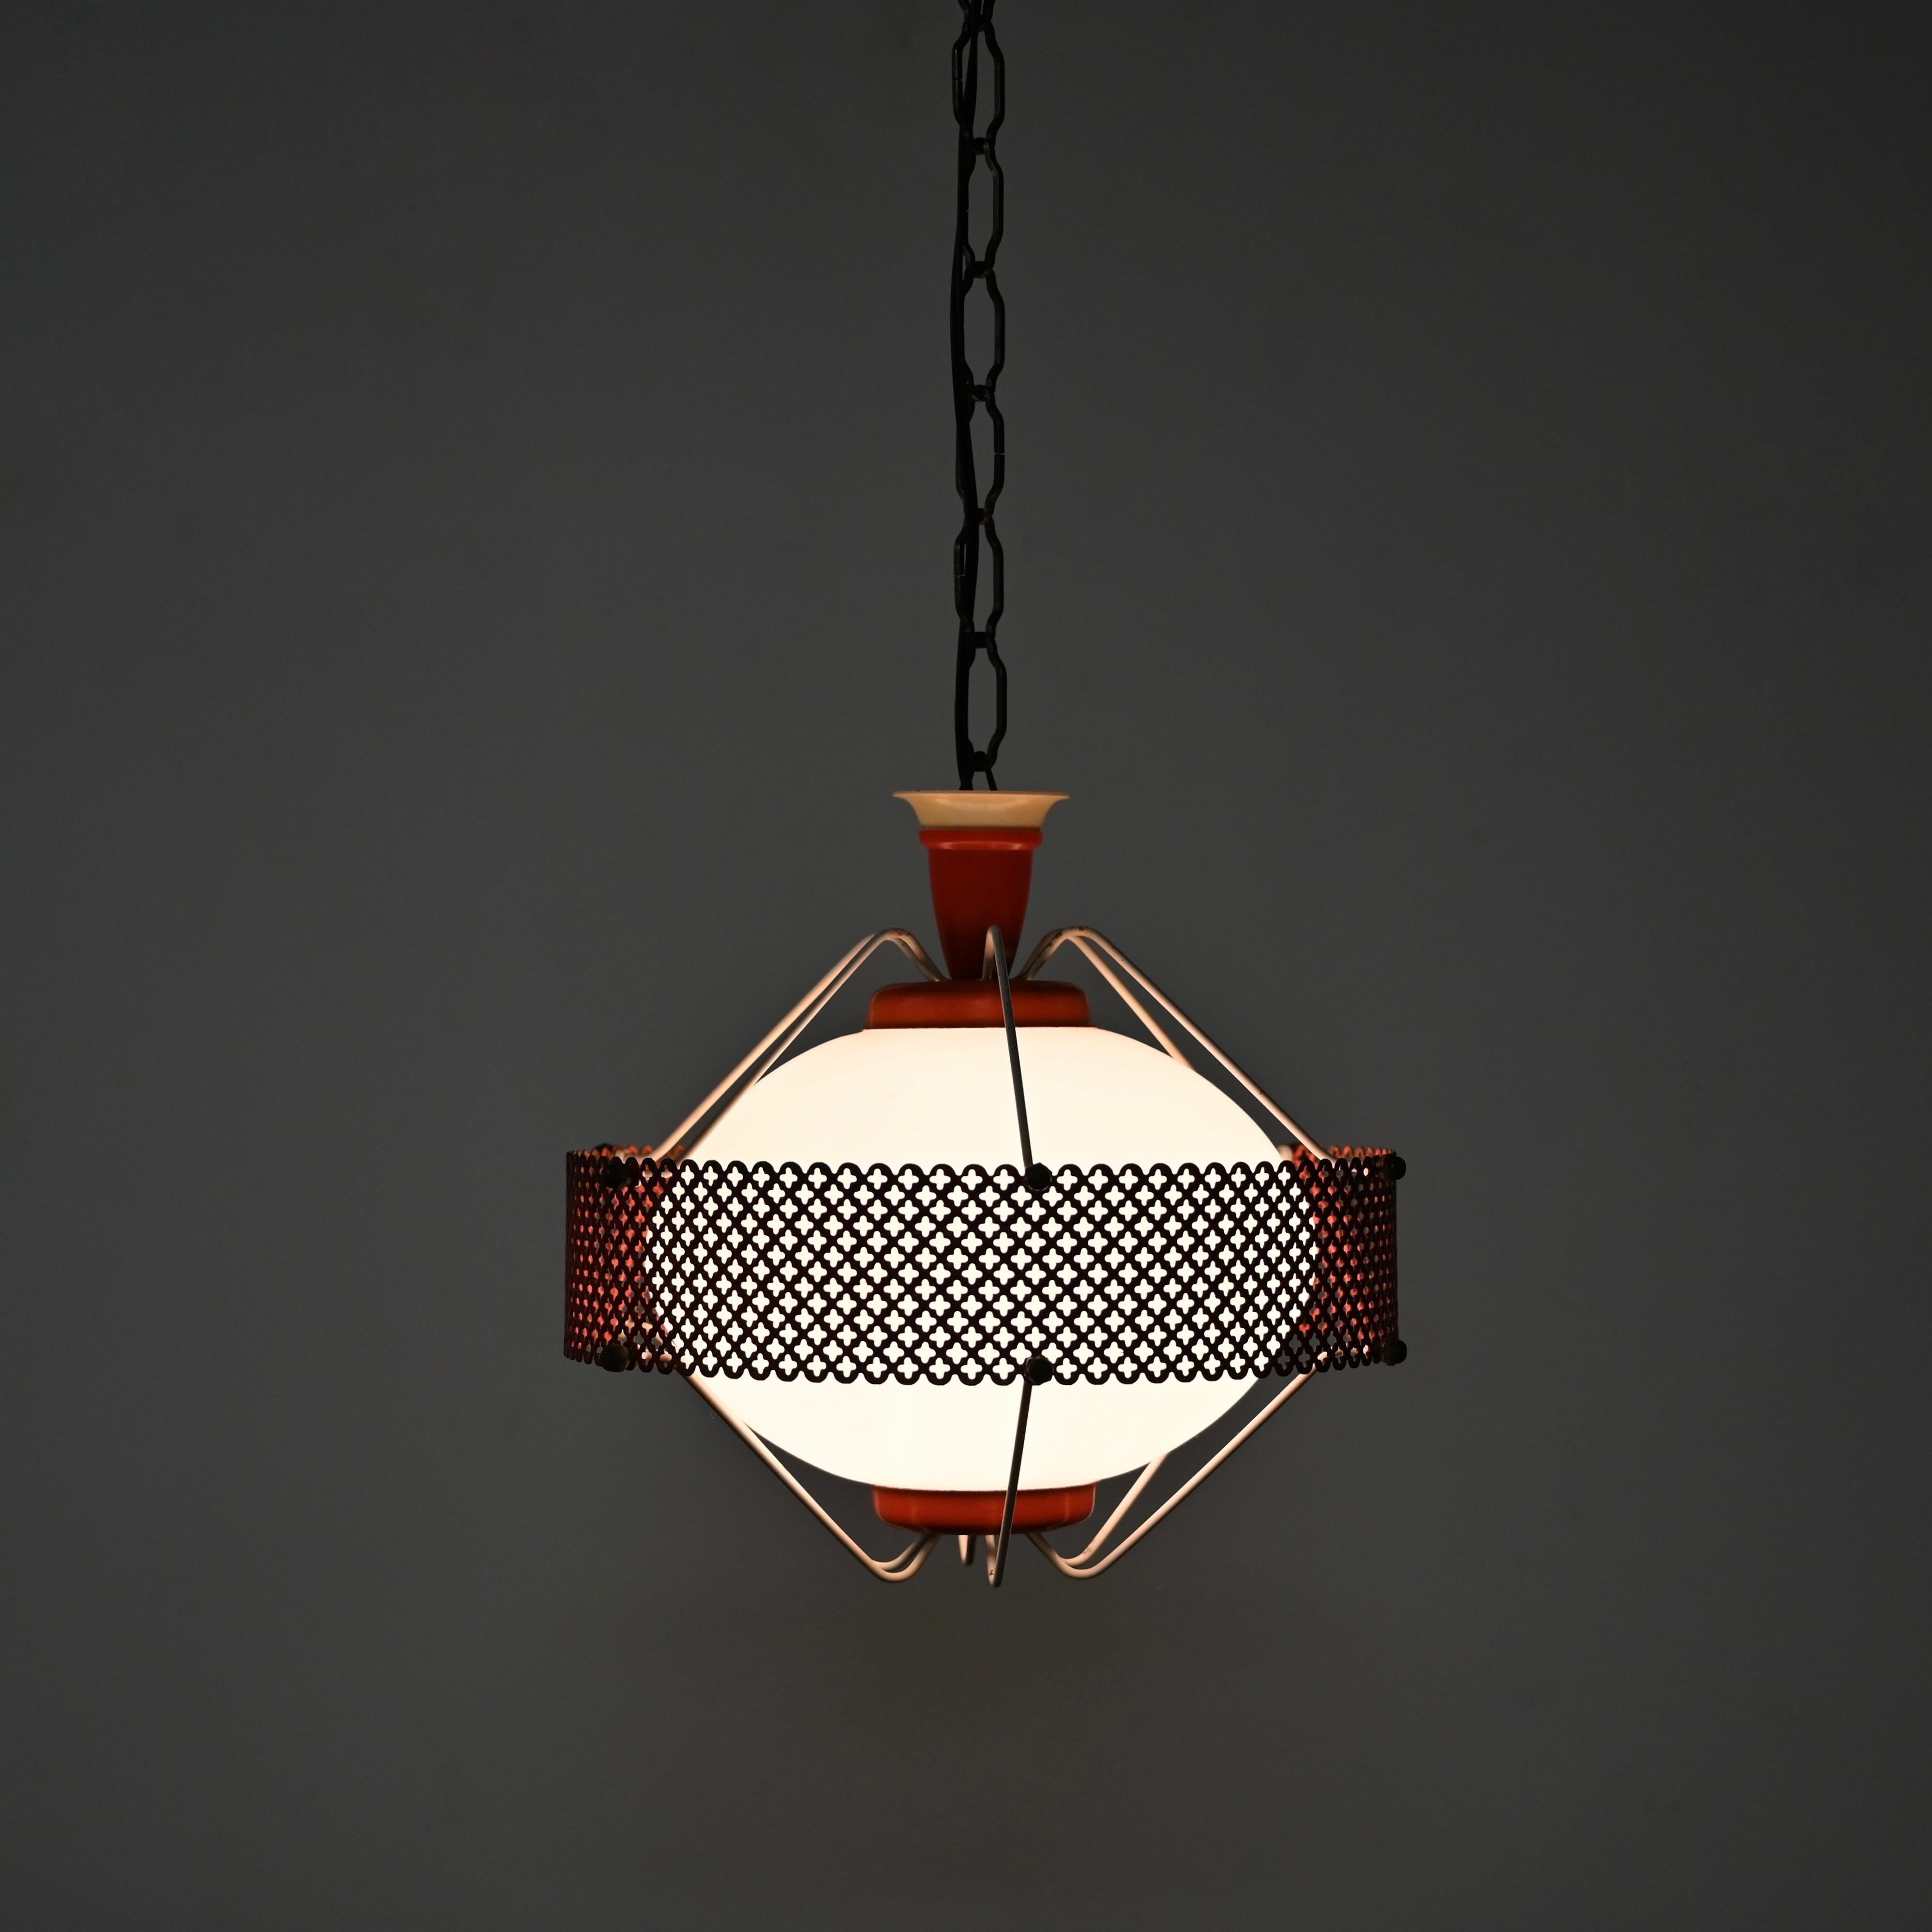 20th Century Mathieu Matégot Pendant Lamps in Opal Glass, Red Metal, 1950s French Lighting For Sale